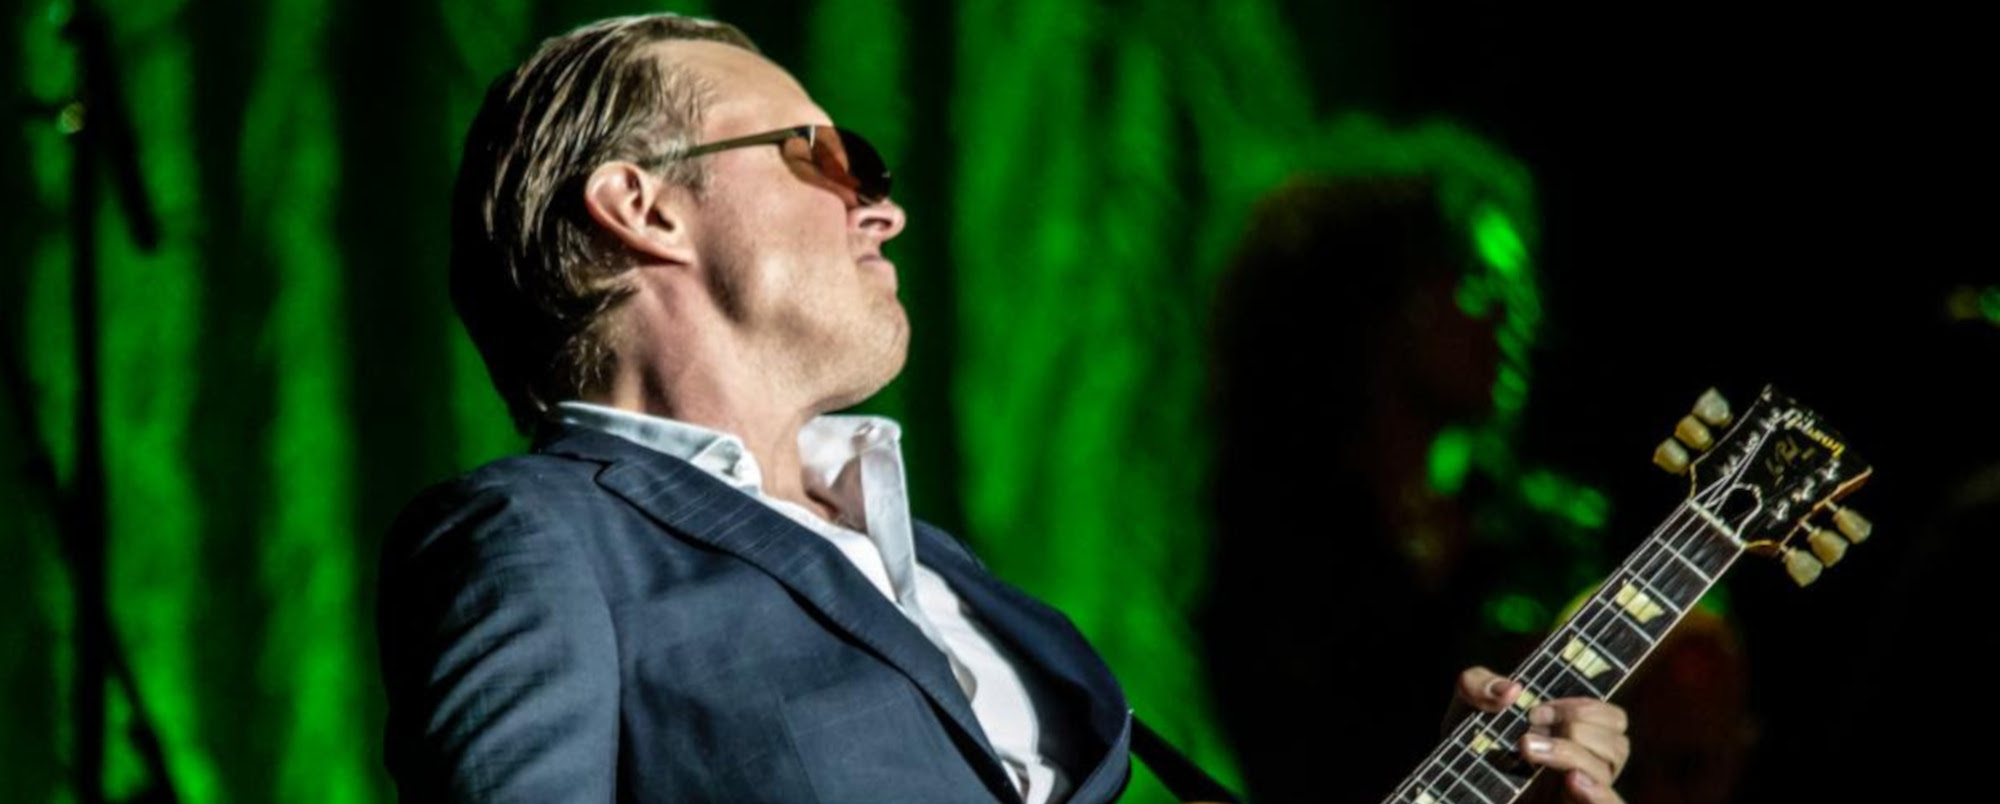 Review: A Live Album Without The Distraction Of An Audience? Blues Rocker Joe Bonamassa Has It Covered